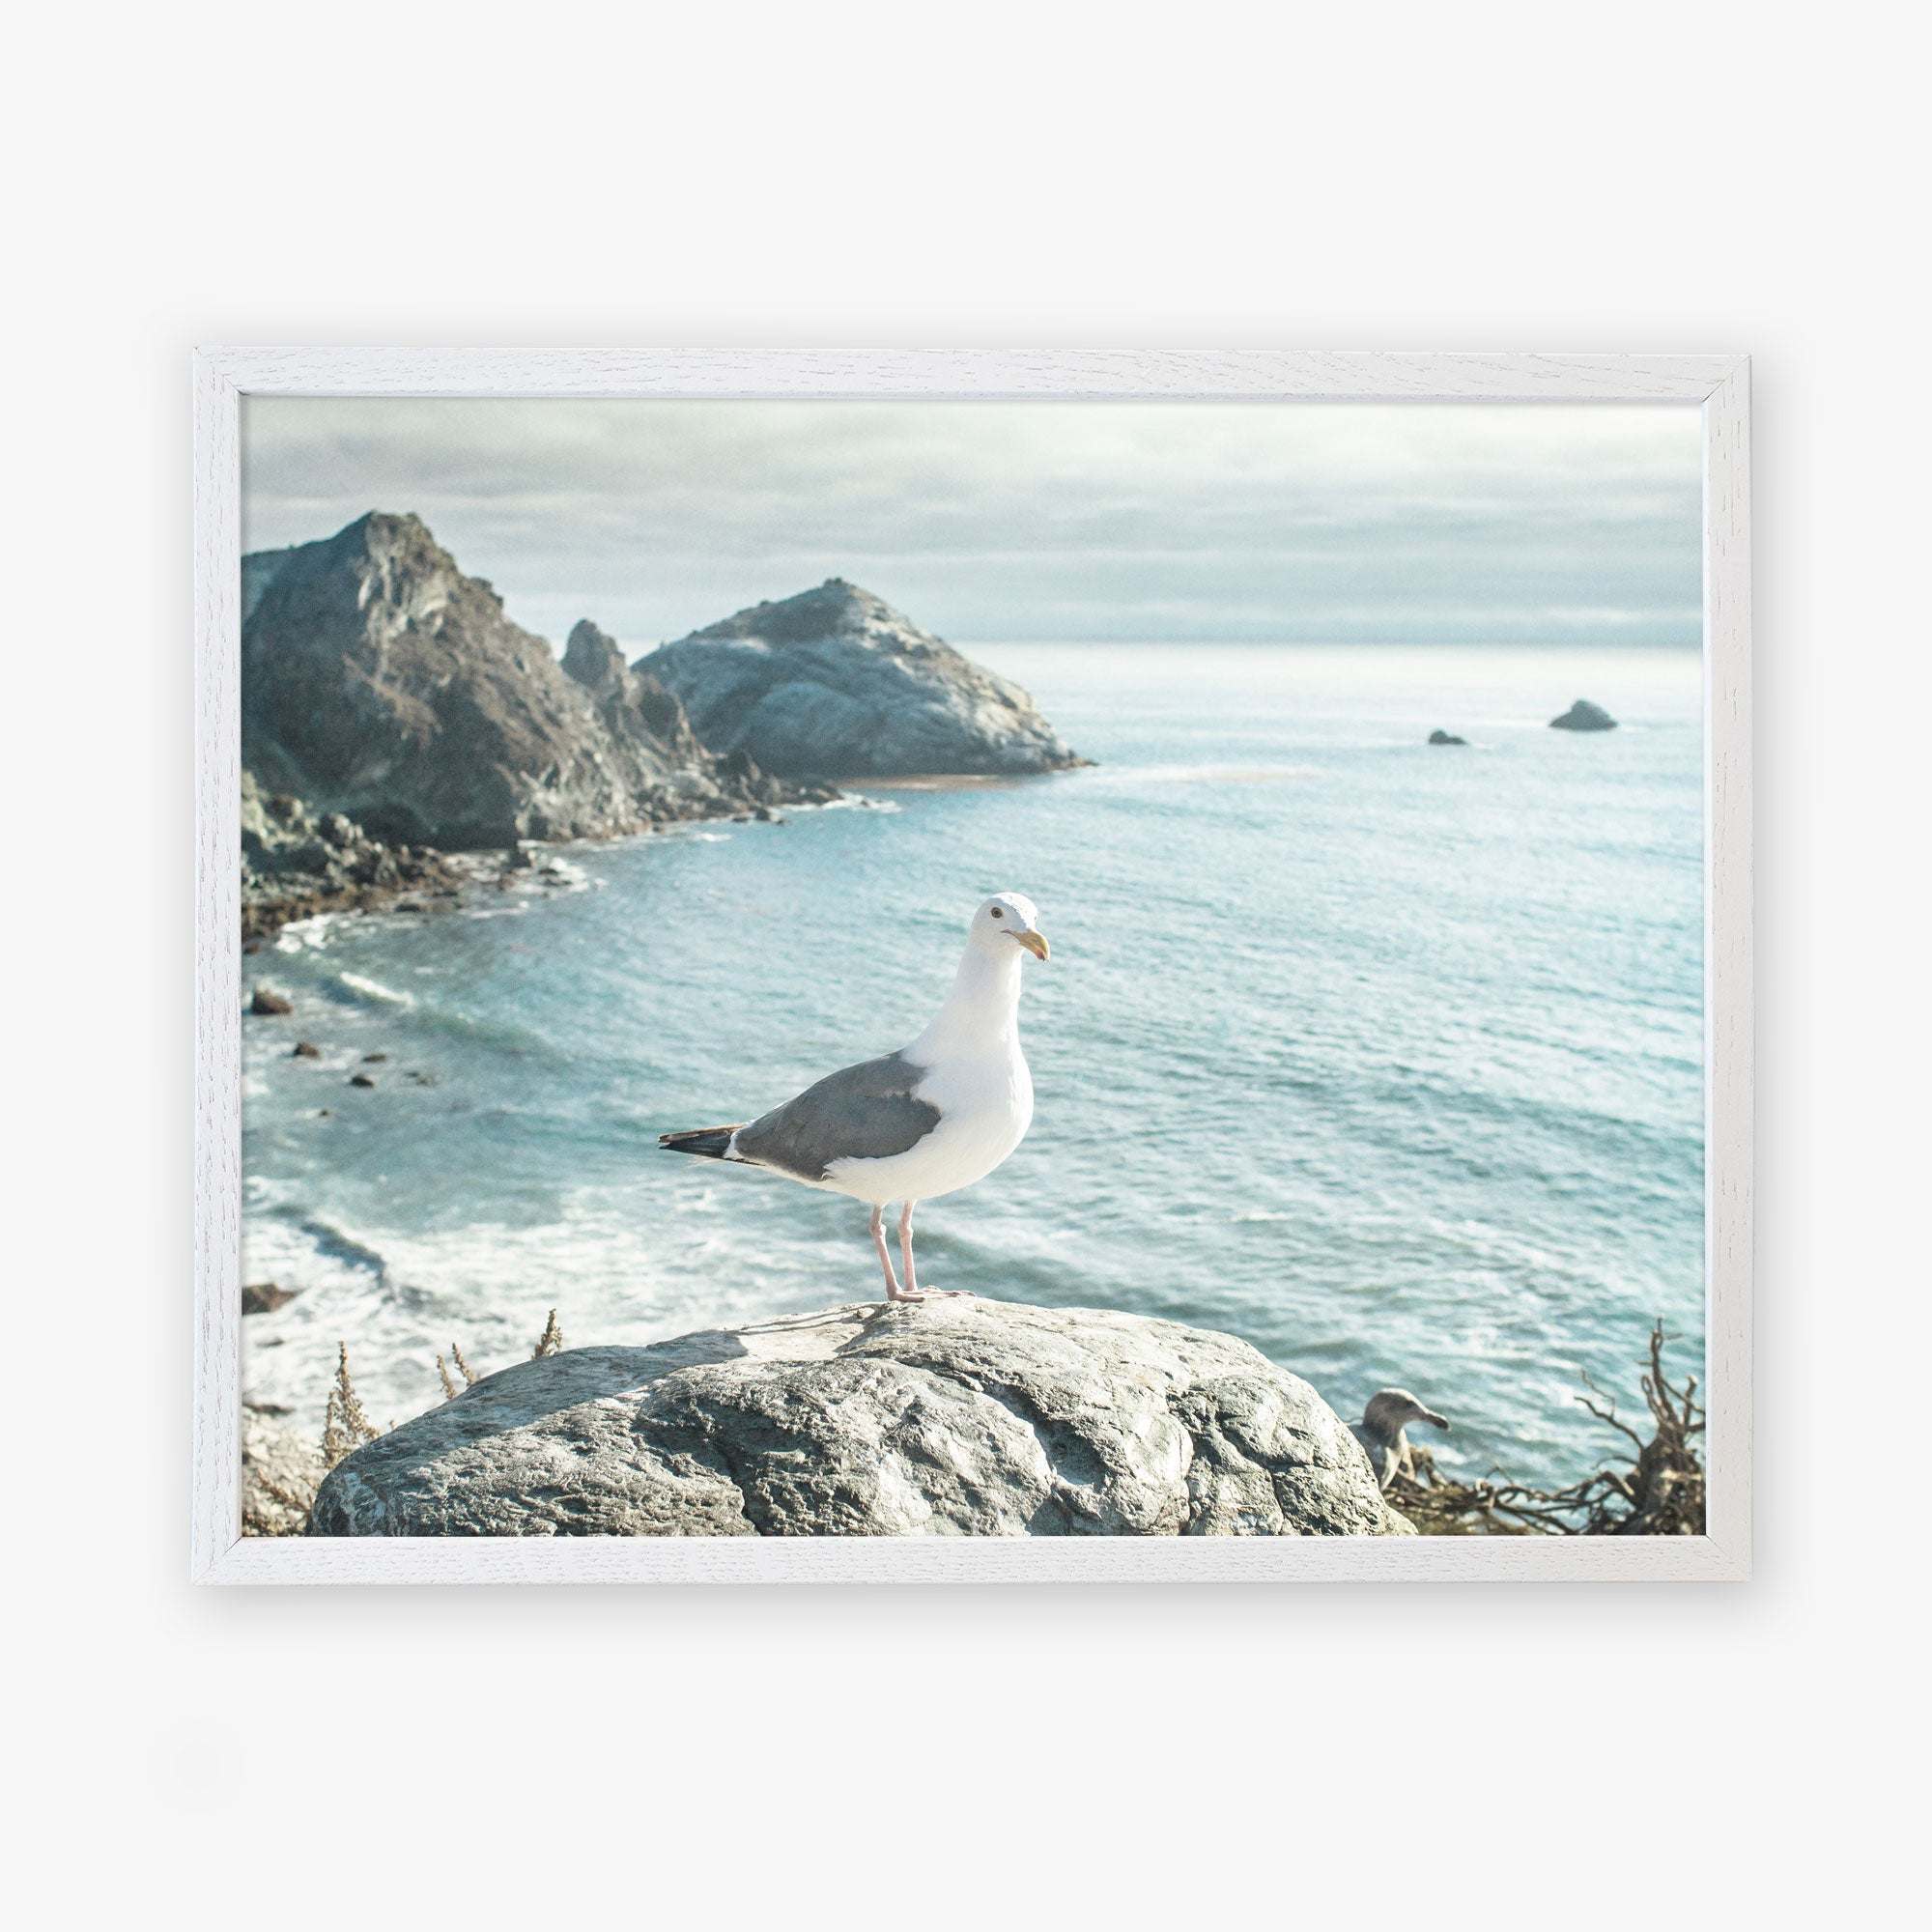 A seagull stands on a rocky outcrop overlooking a serene coastline with jagged cliffs and calm blue waters under a hazy sky, captured on archival photographic paper as if in a Big Sur Landscape Print by Offley Green.